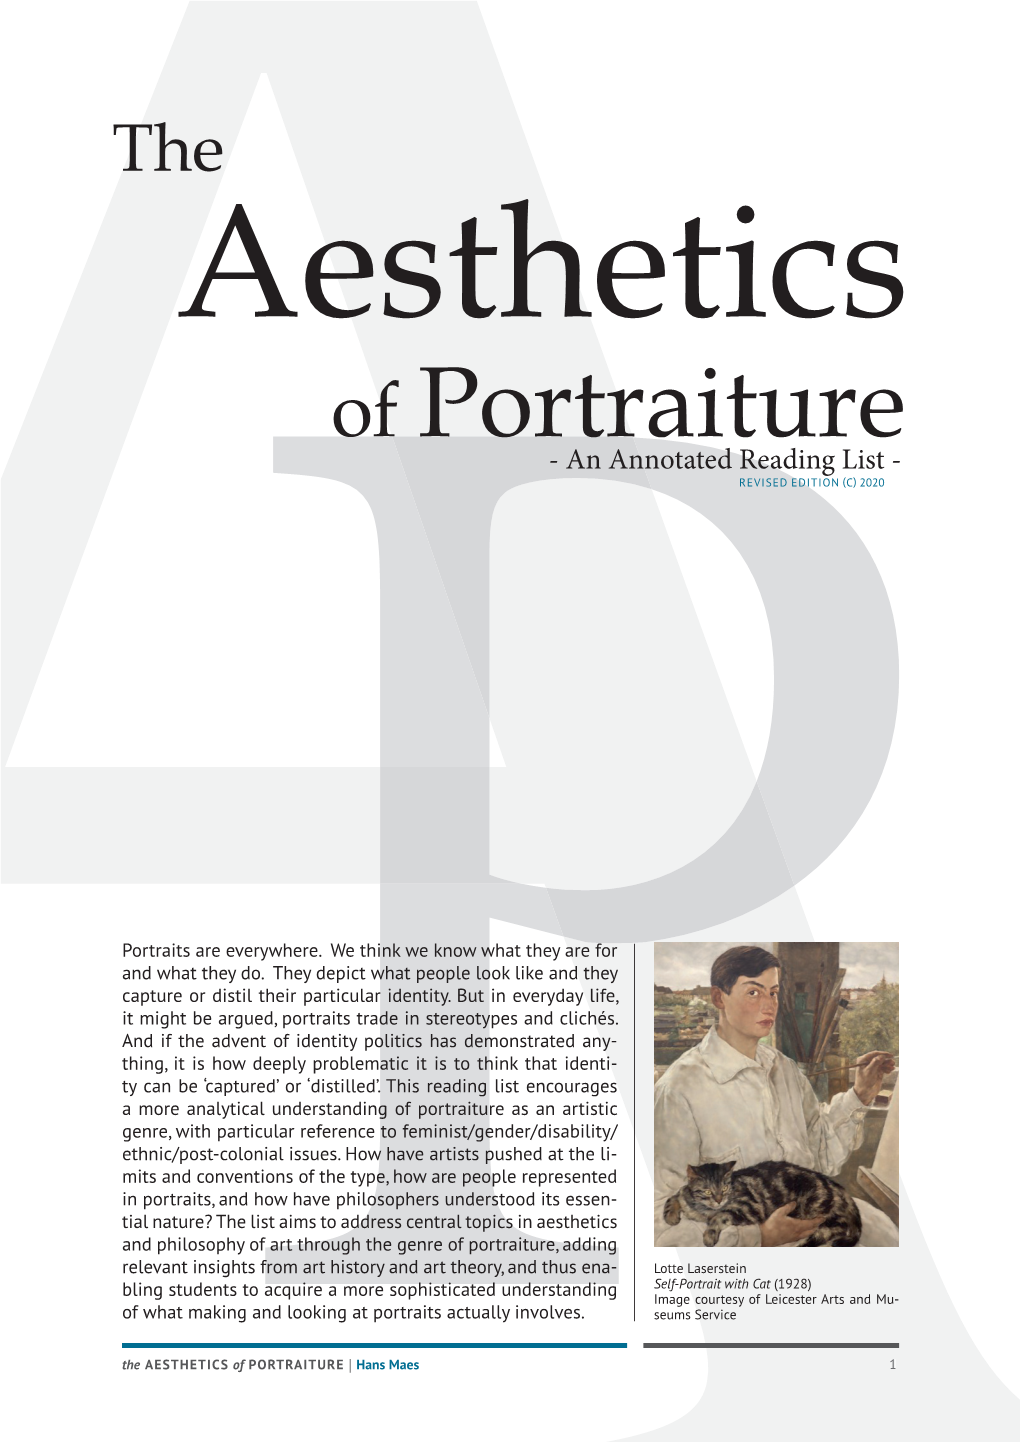 The Aesthetics of Portraiture - an Annotated Reading List